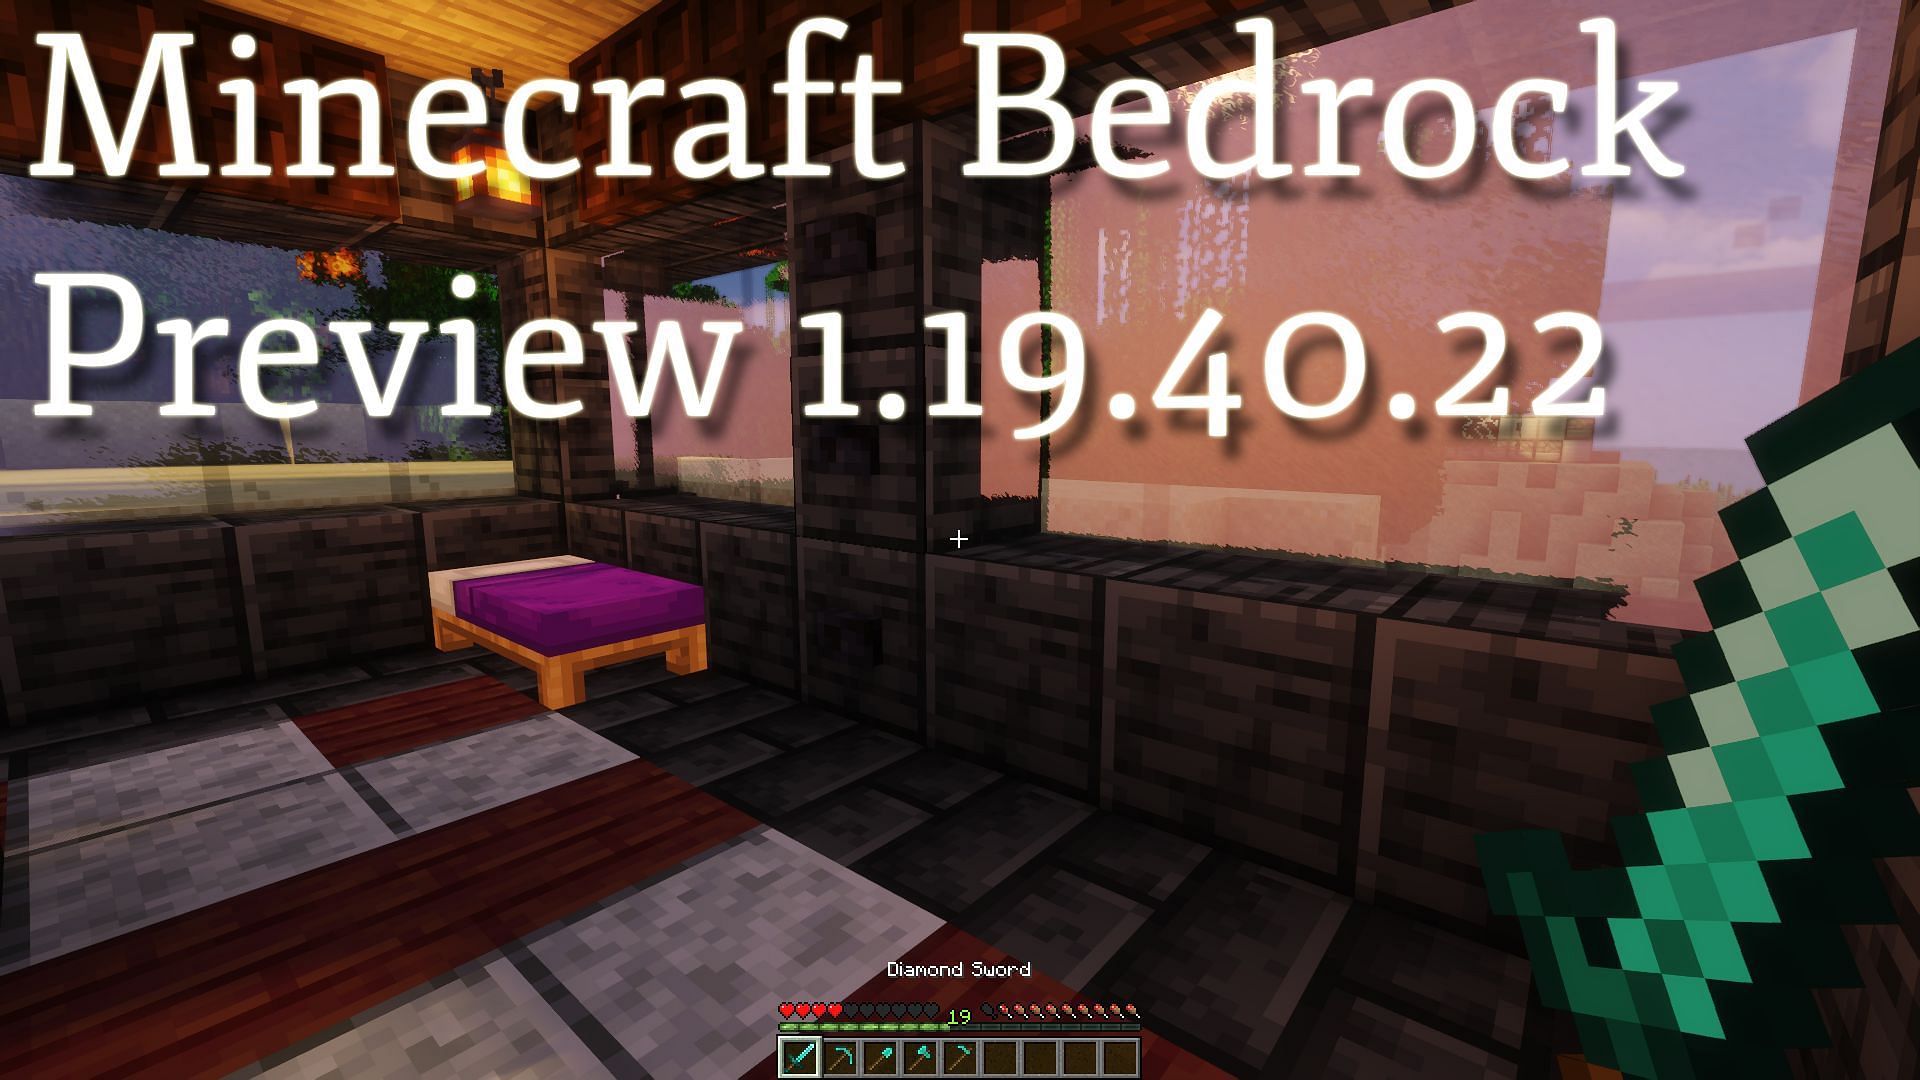 Preview 1.19.40.22 has been released (Image via Minecraft)